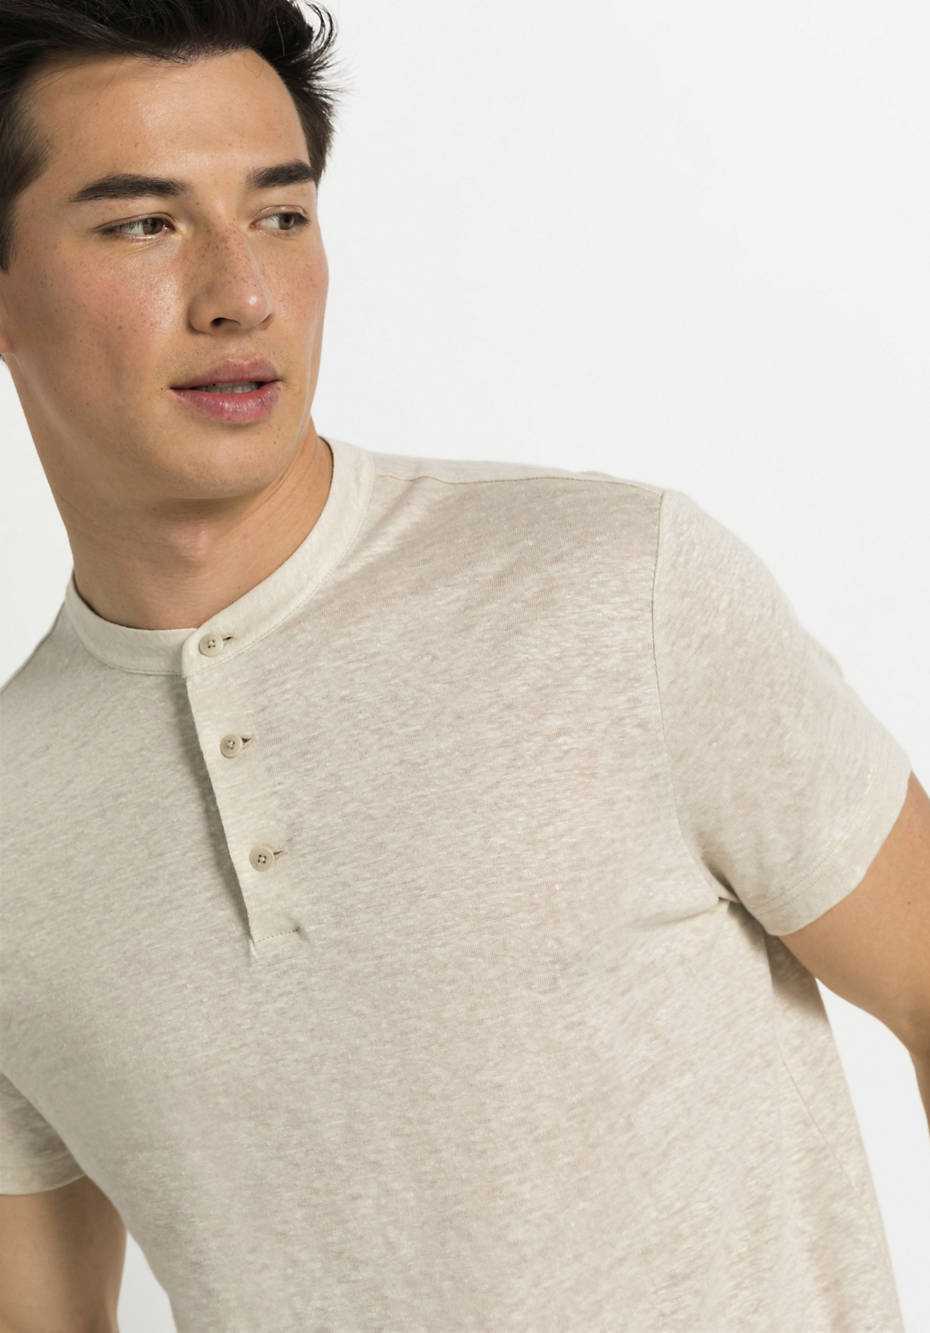 Shirt with stand-up collar made of pure linen